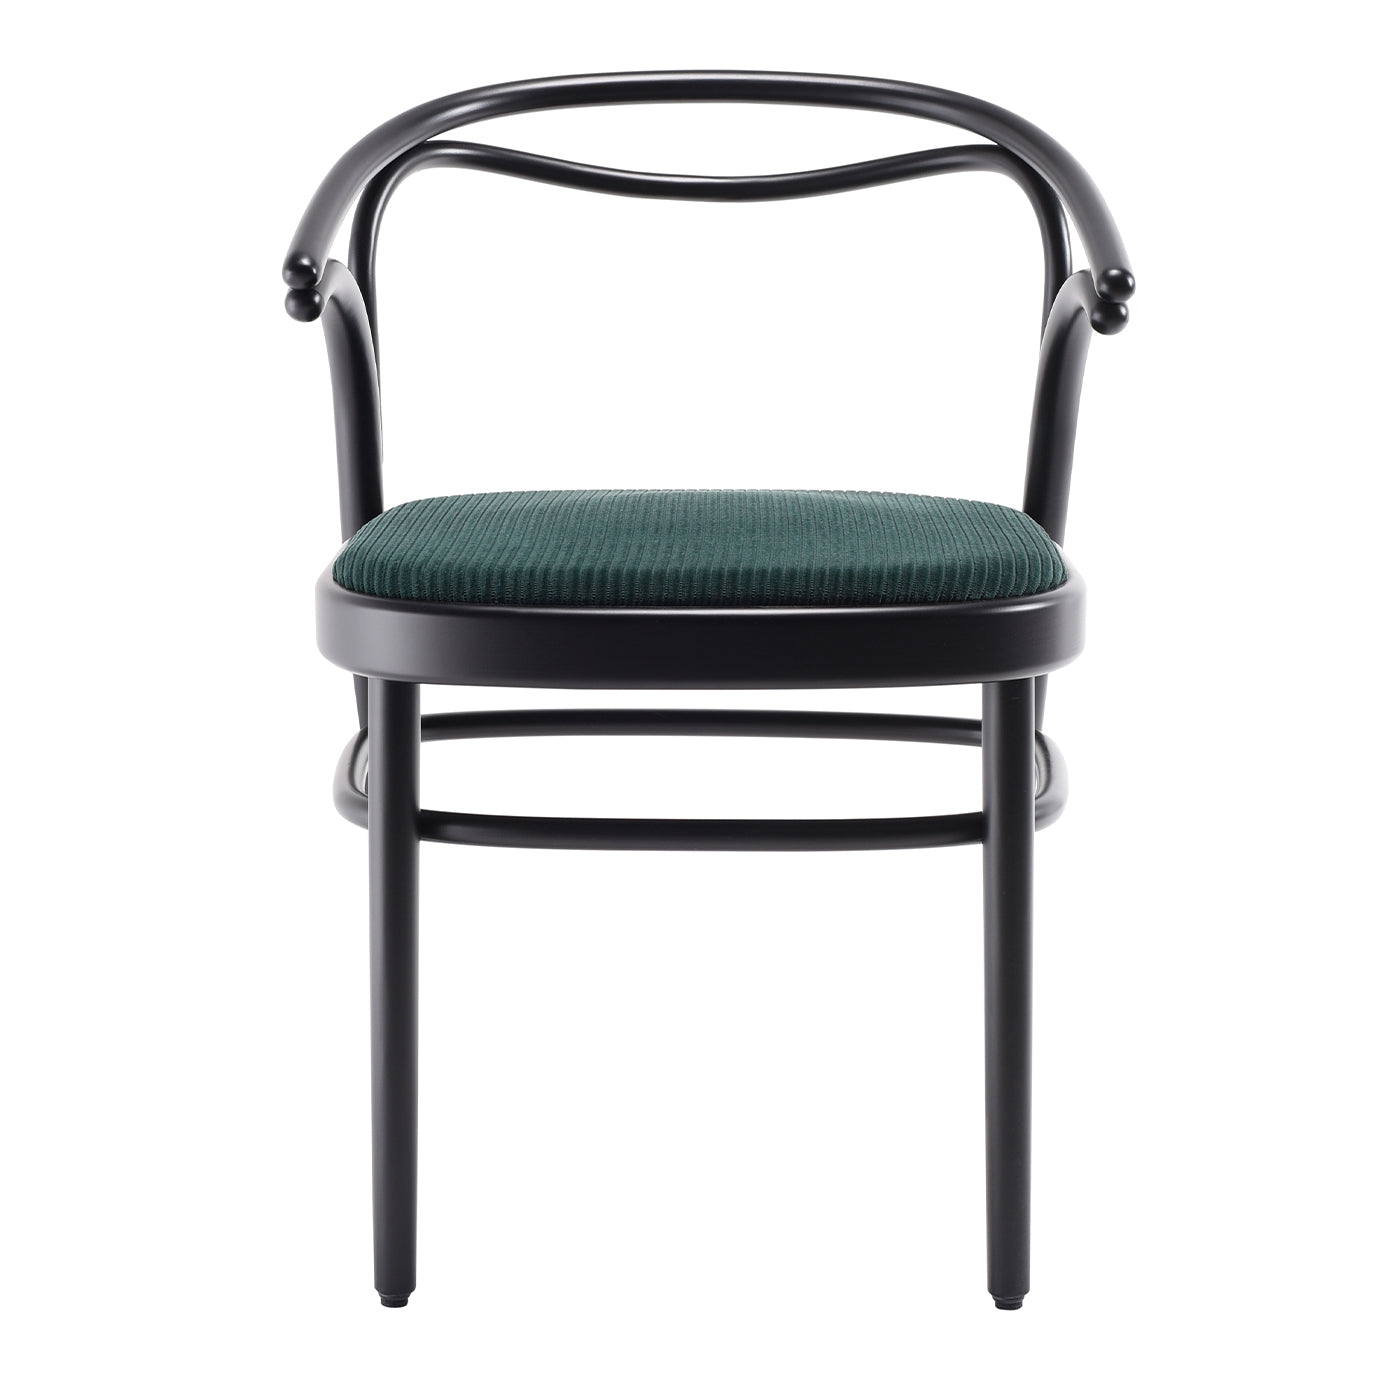 BEAULIEU dining chair with upholstered seat by PHILIPPE NIGRO - Alternative view 1